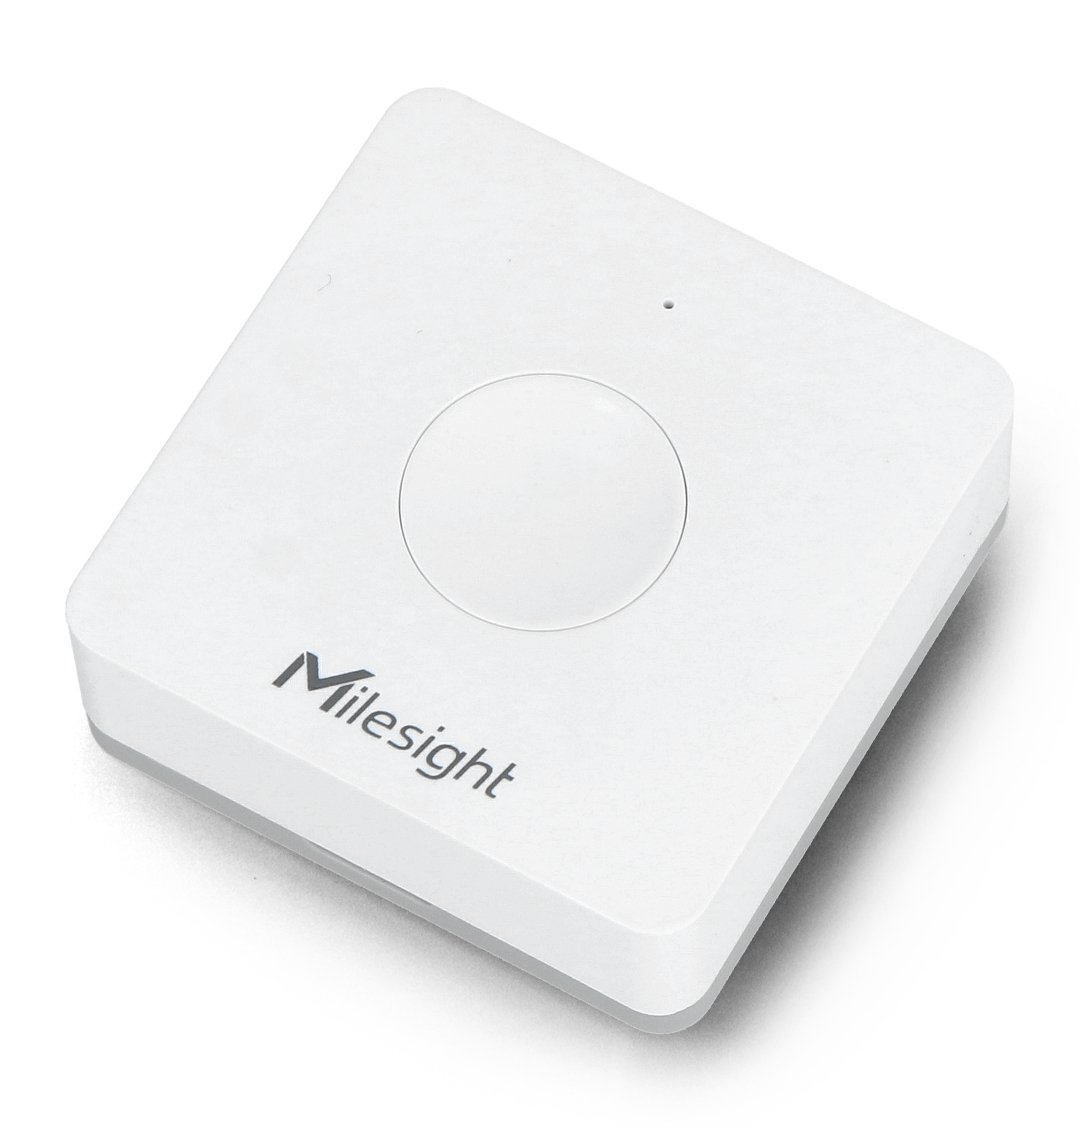 The Milesight smart switch lies on a white background.